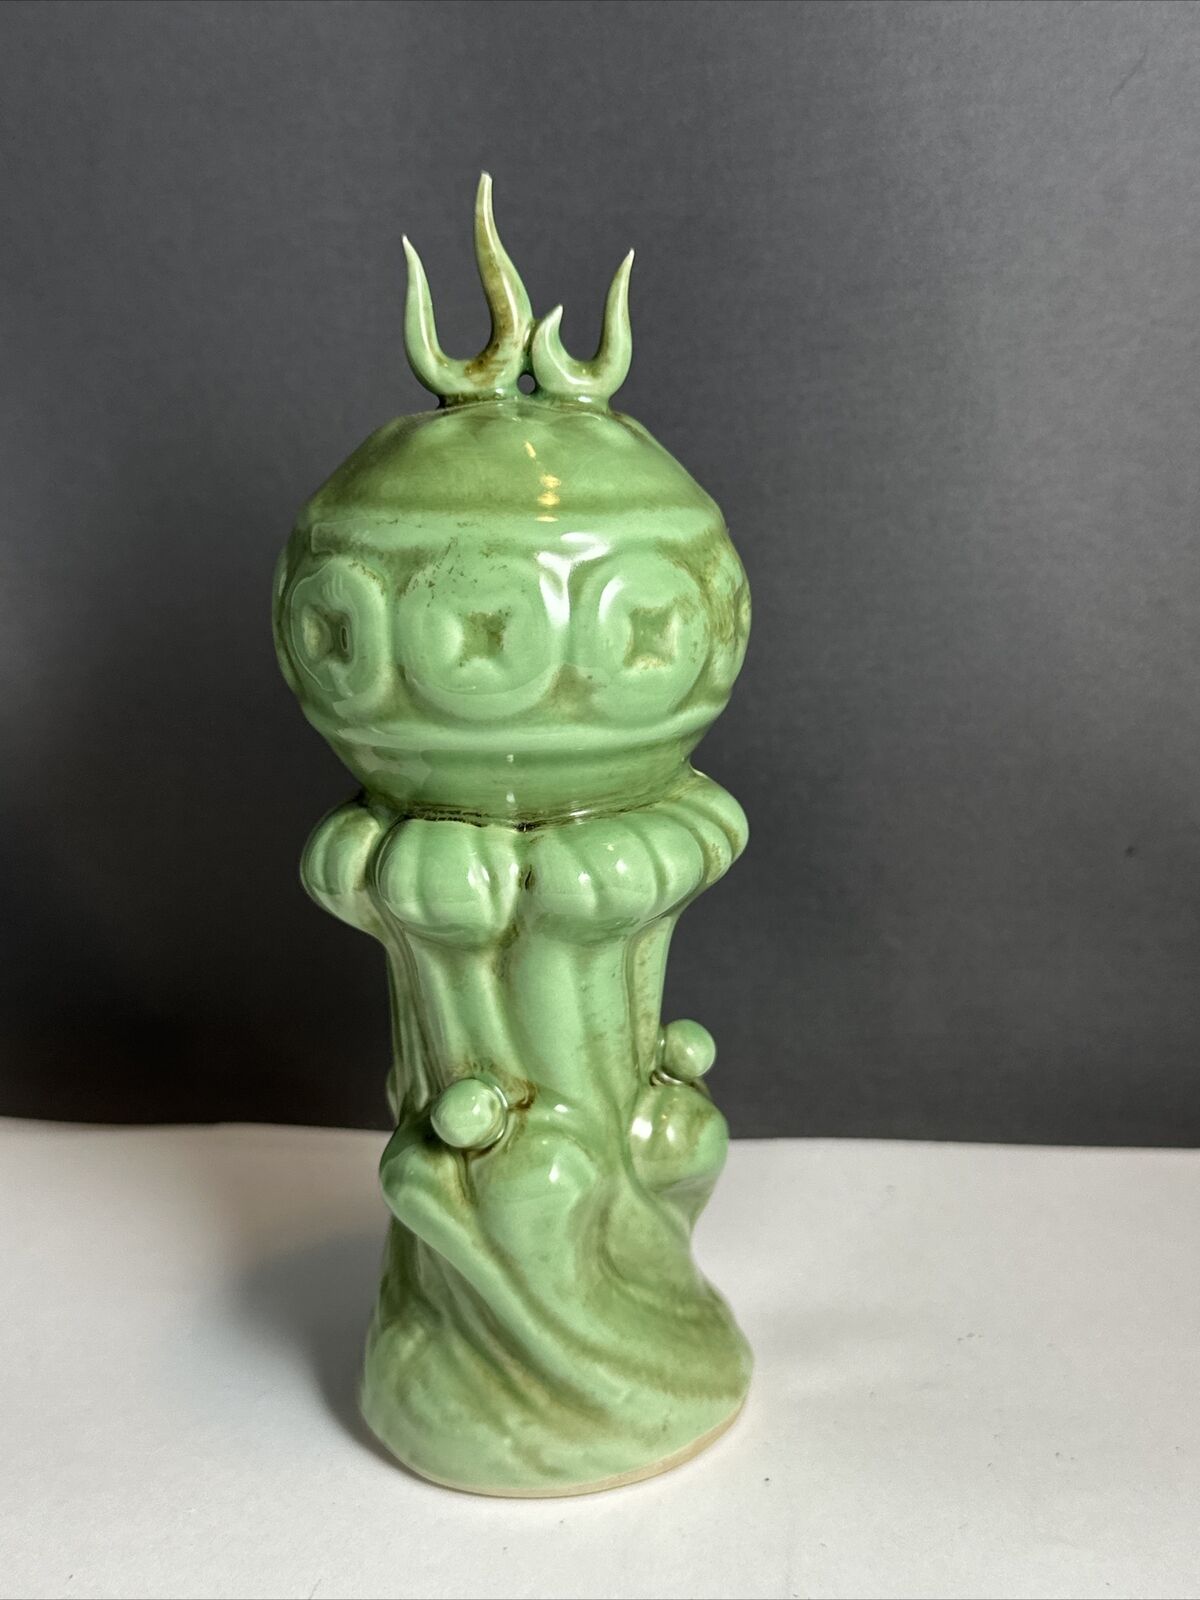 Vintage Green Glazed Art Object Asian Abstract Ceramic Figure